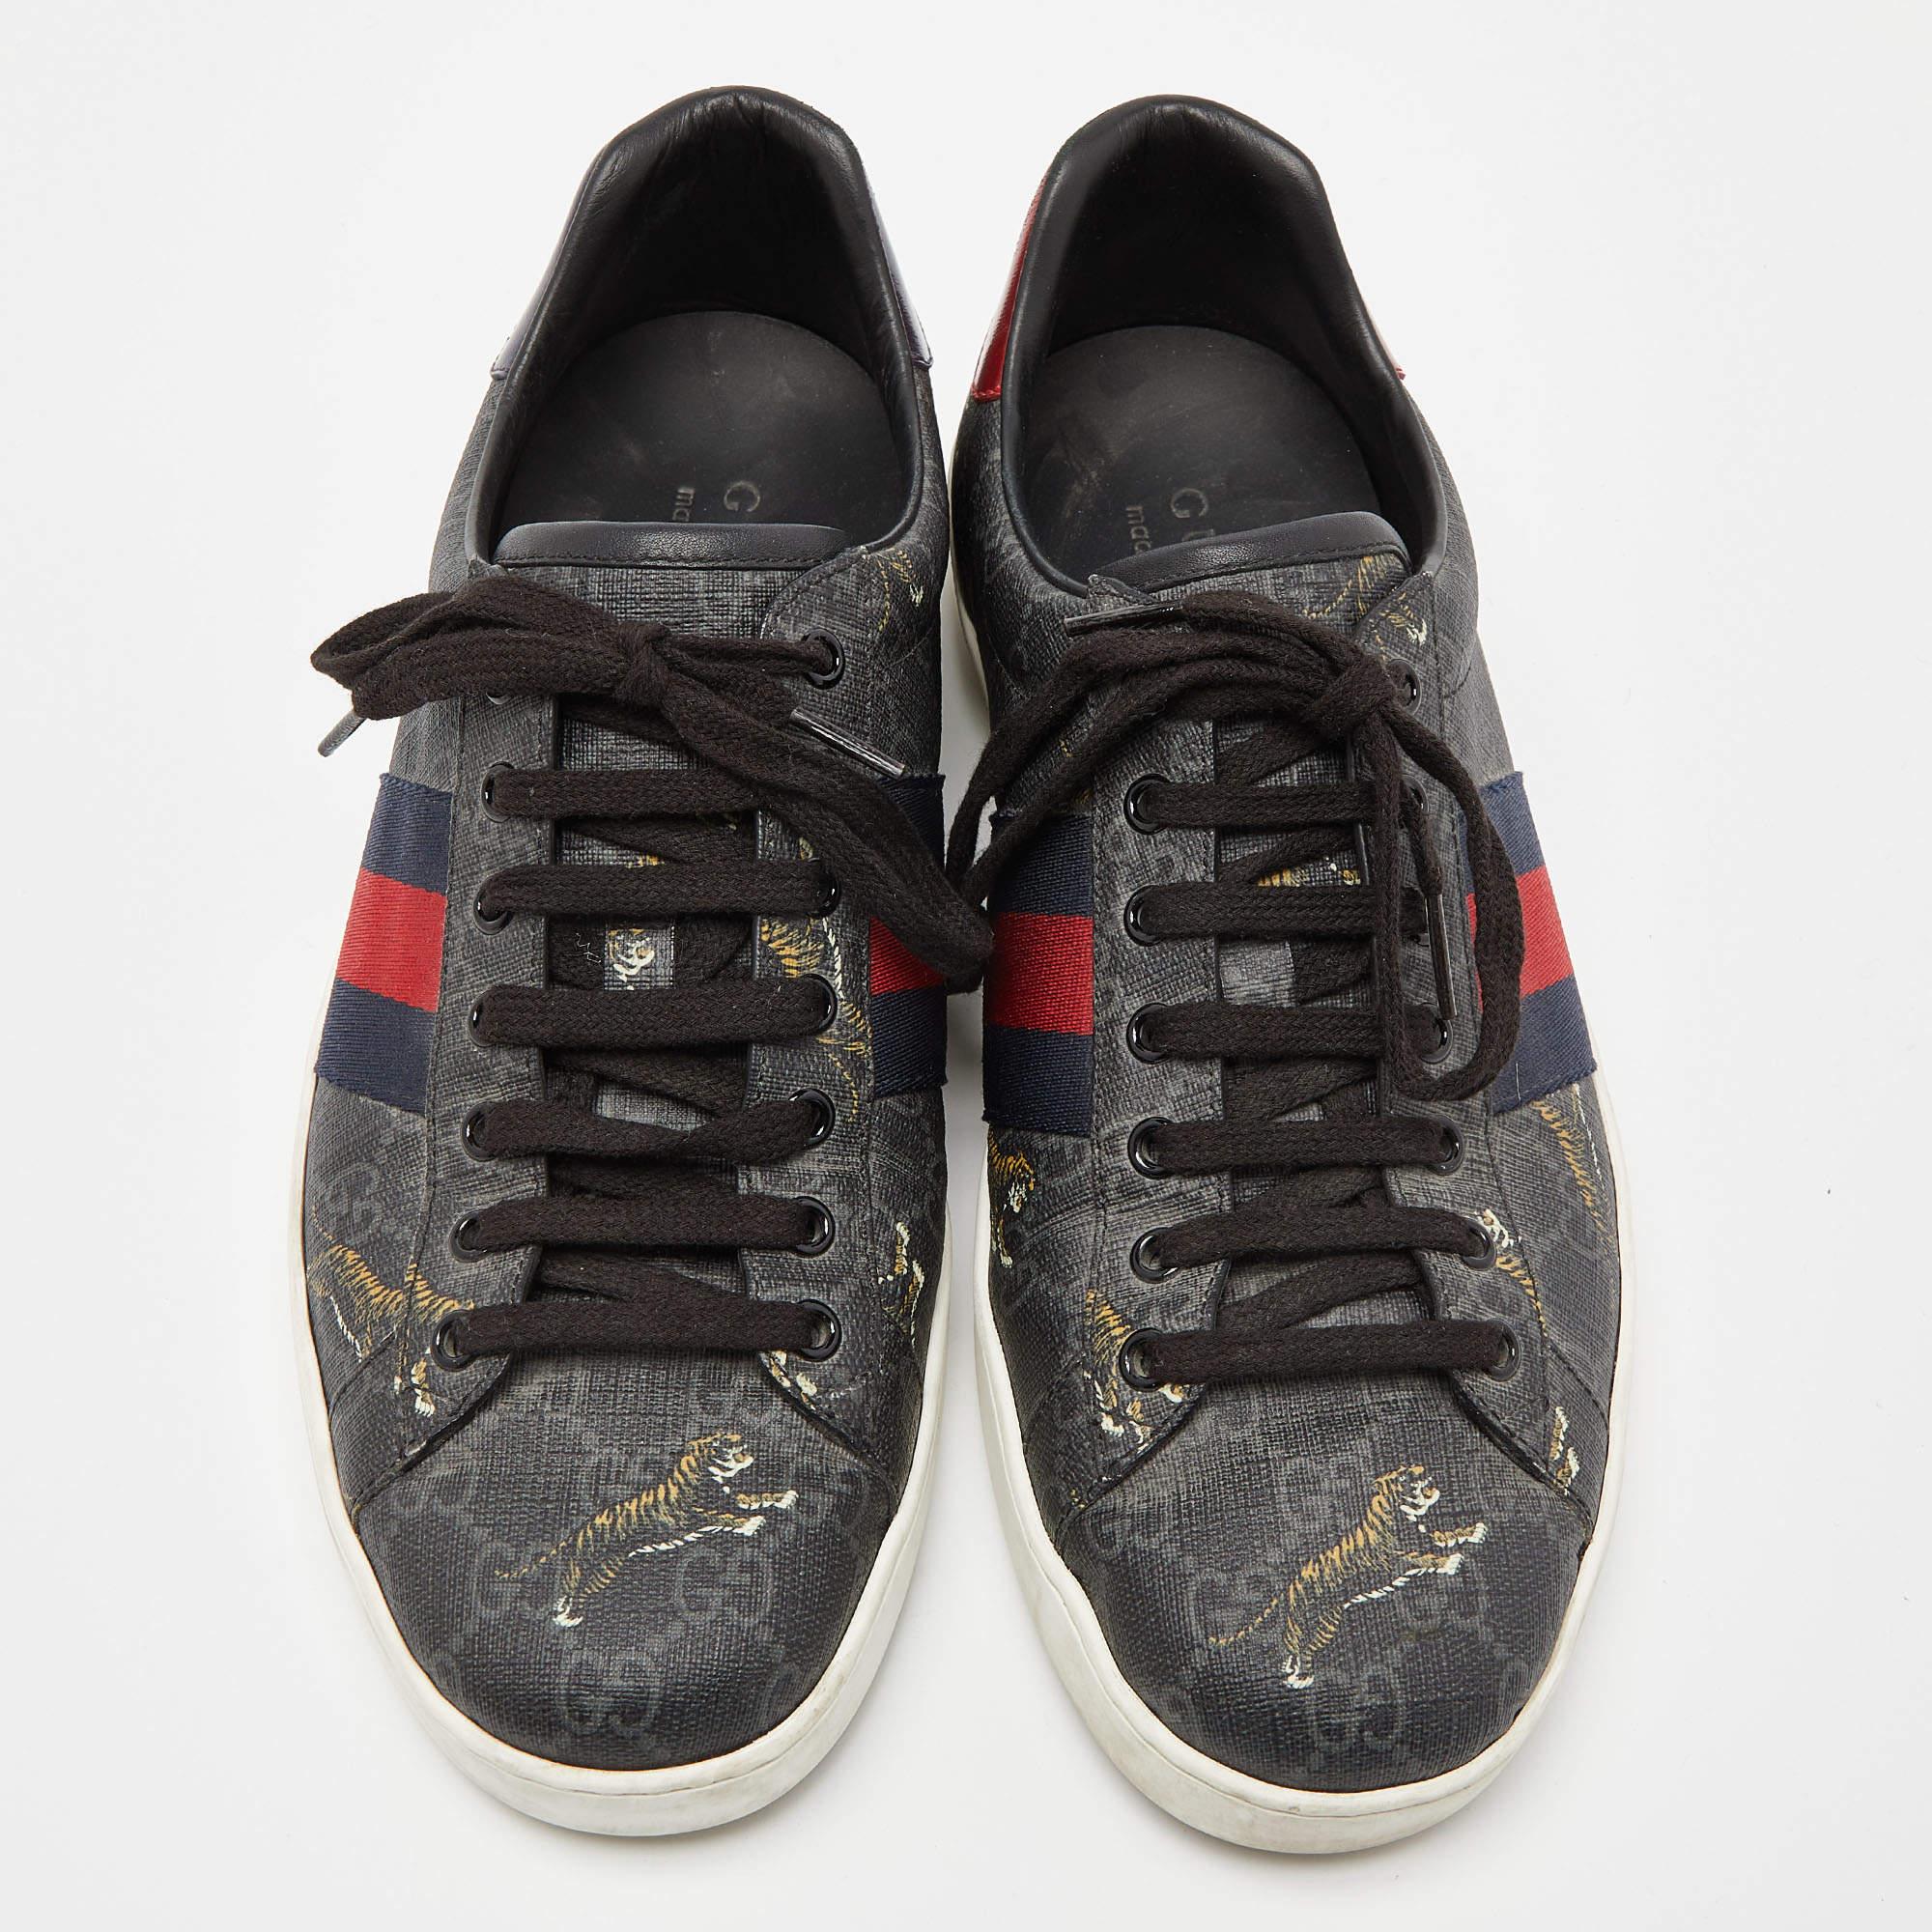 Give your outfit a luxe update with this pair of Gucci black sneakers. The creation is sewn perfectly to help you make a statement in them for a long time.

Includes
Original Dustbag